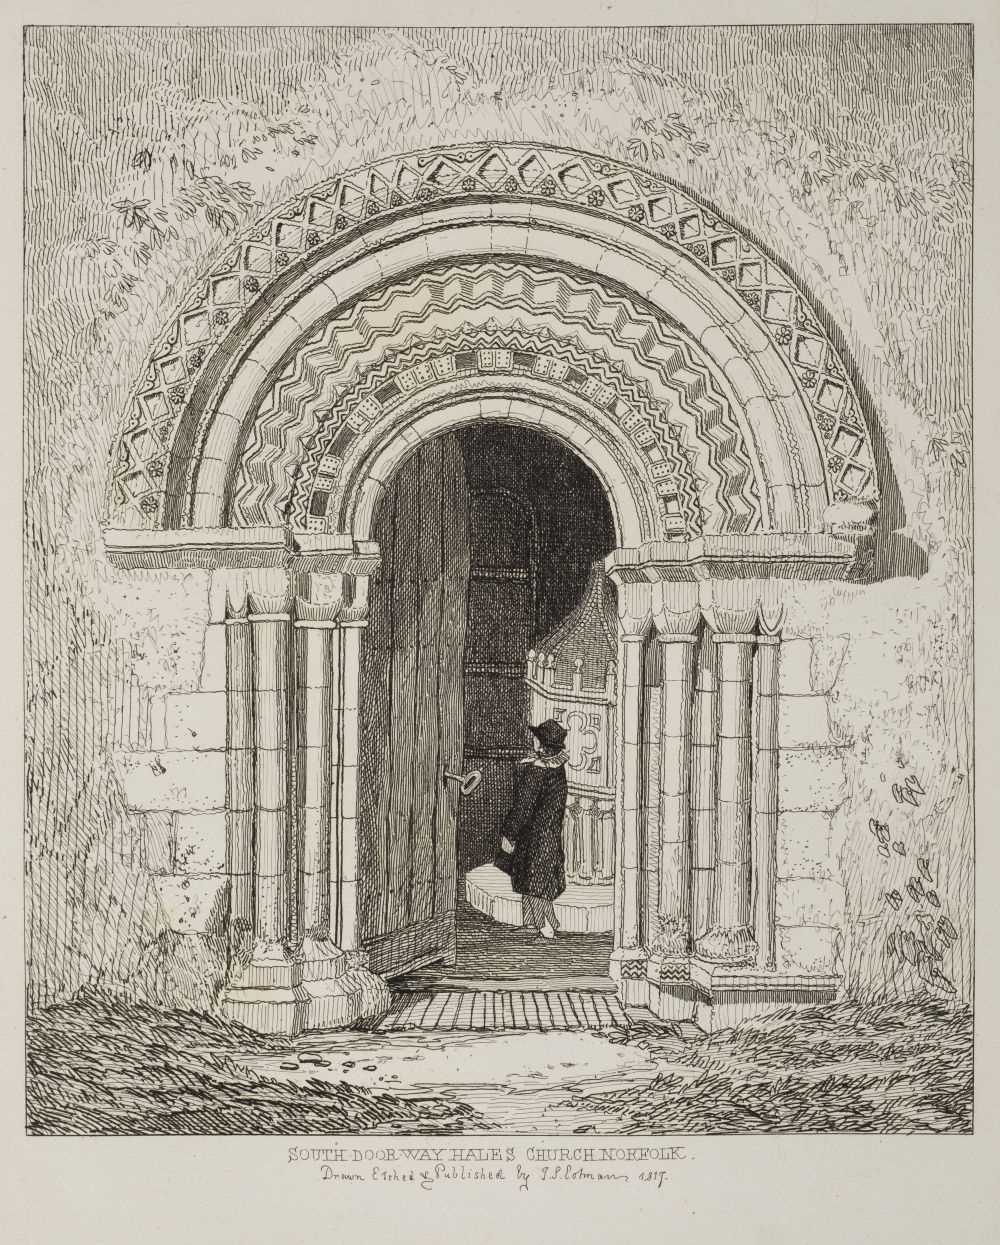 Lot 295 - Cotman (John Sell). Specimens of Norman and Gothic Architecture, 1816-18